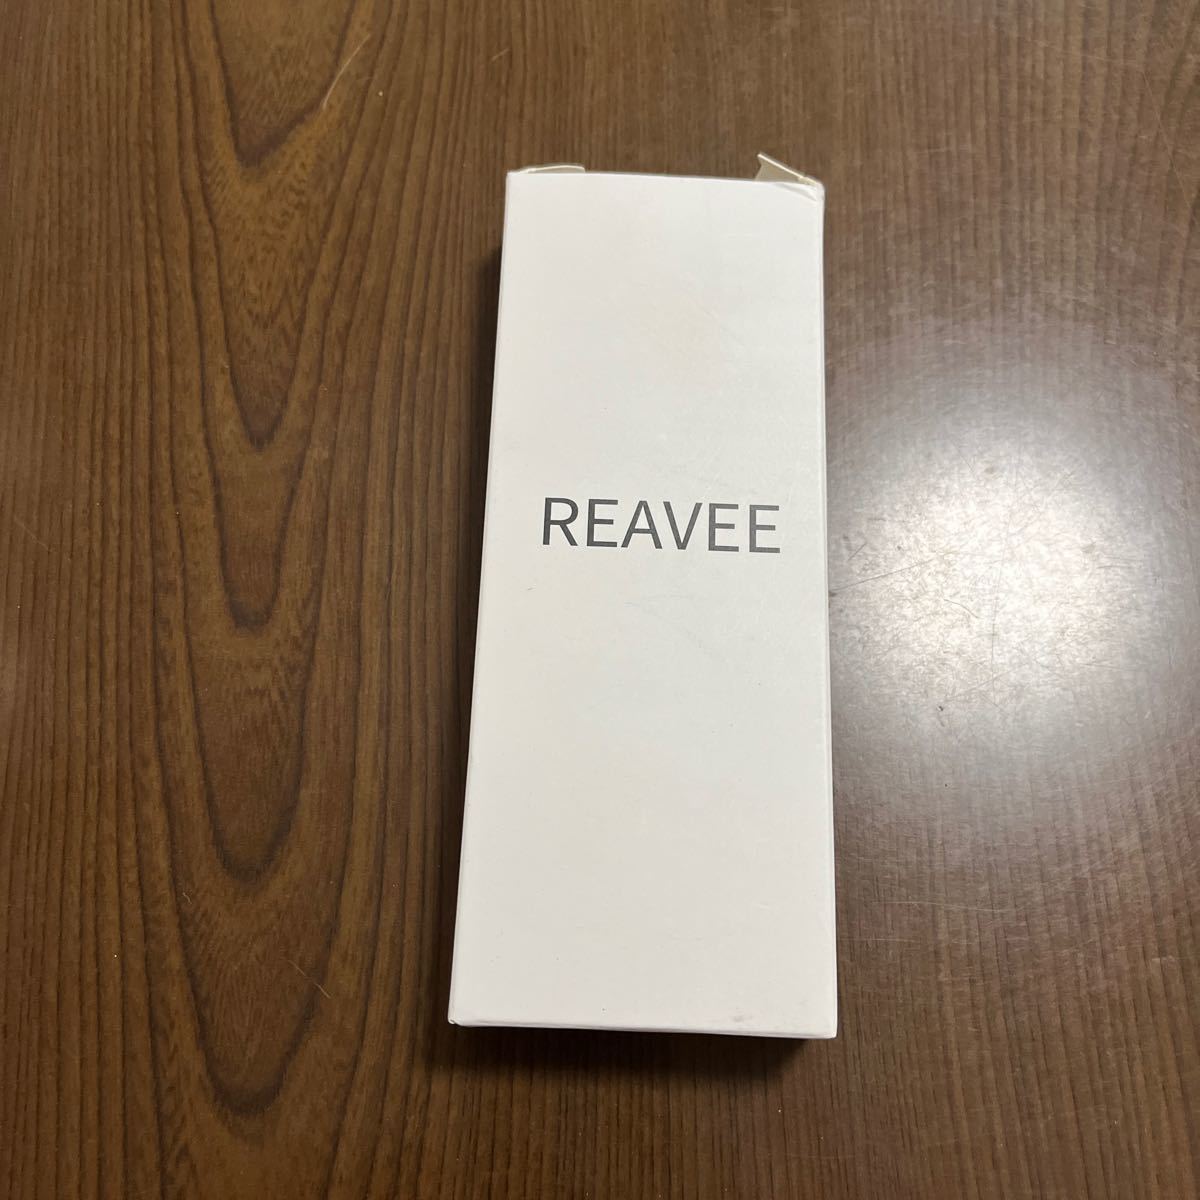 511p1007* [REAVEE] super thin type lens farsighted glasses portable case attaching . compact pocket . storage light weight man and woman use stylish frequency 